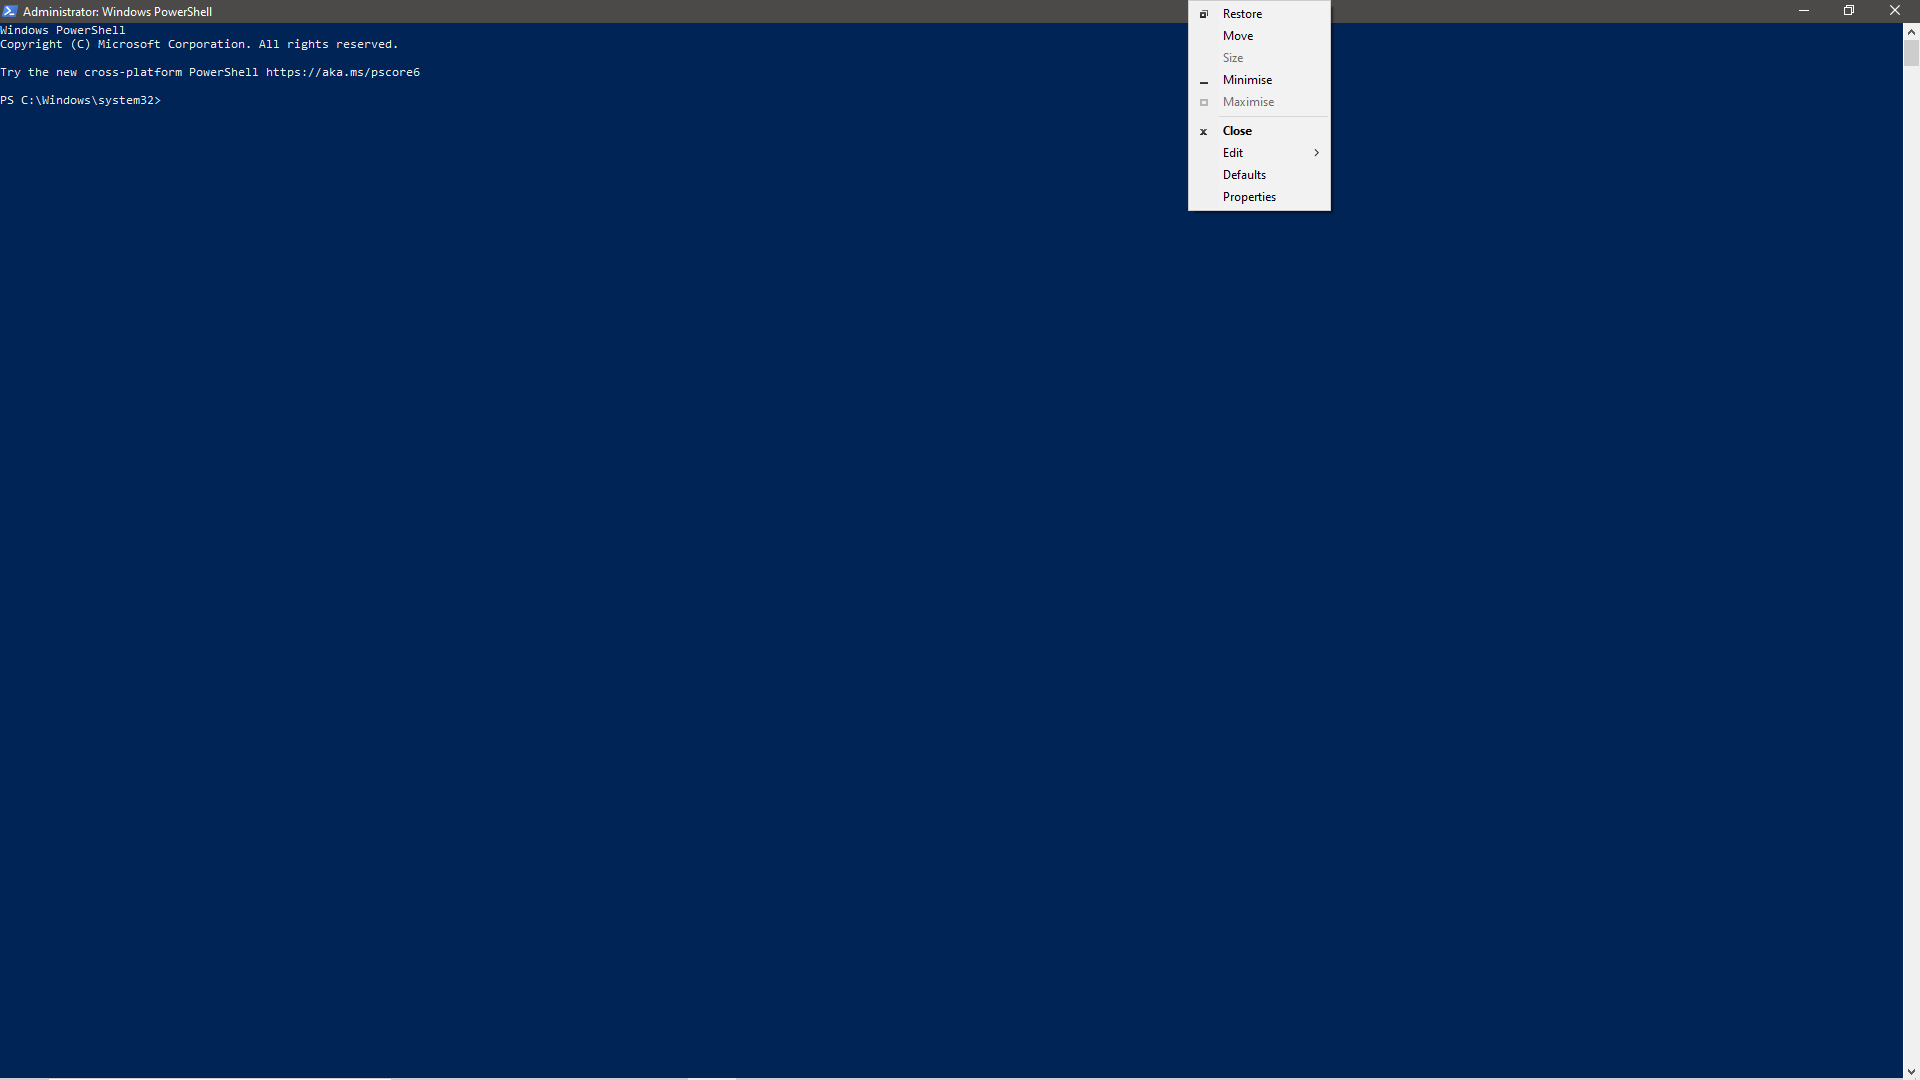 How to display PowerShell menu using short cut instead of right click? Ps look at the Image caf4adcf-11ad-46b6-a091-4b27f1dc534a?upload=true.png